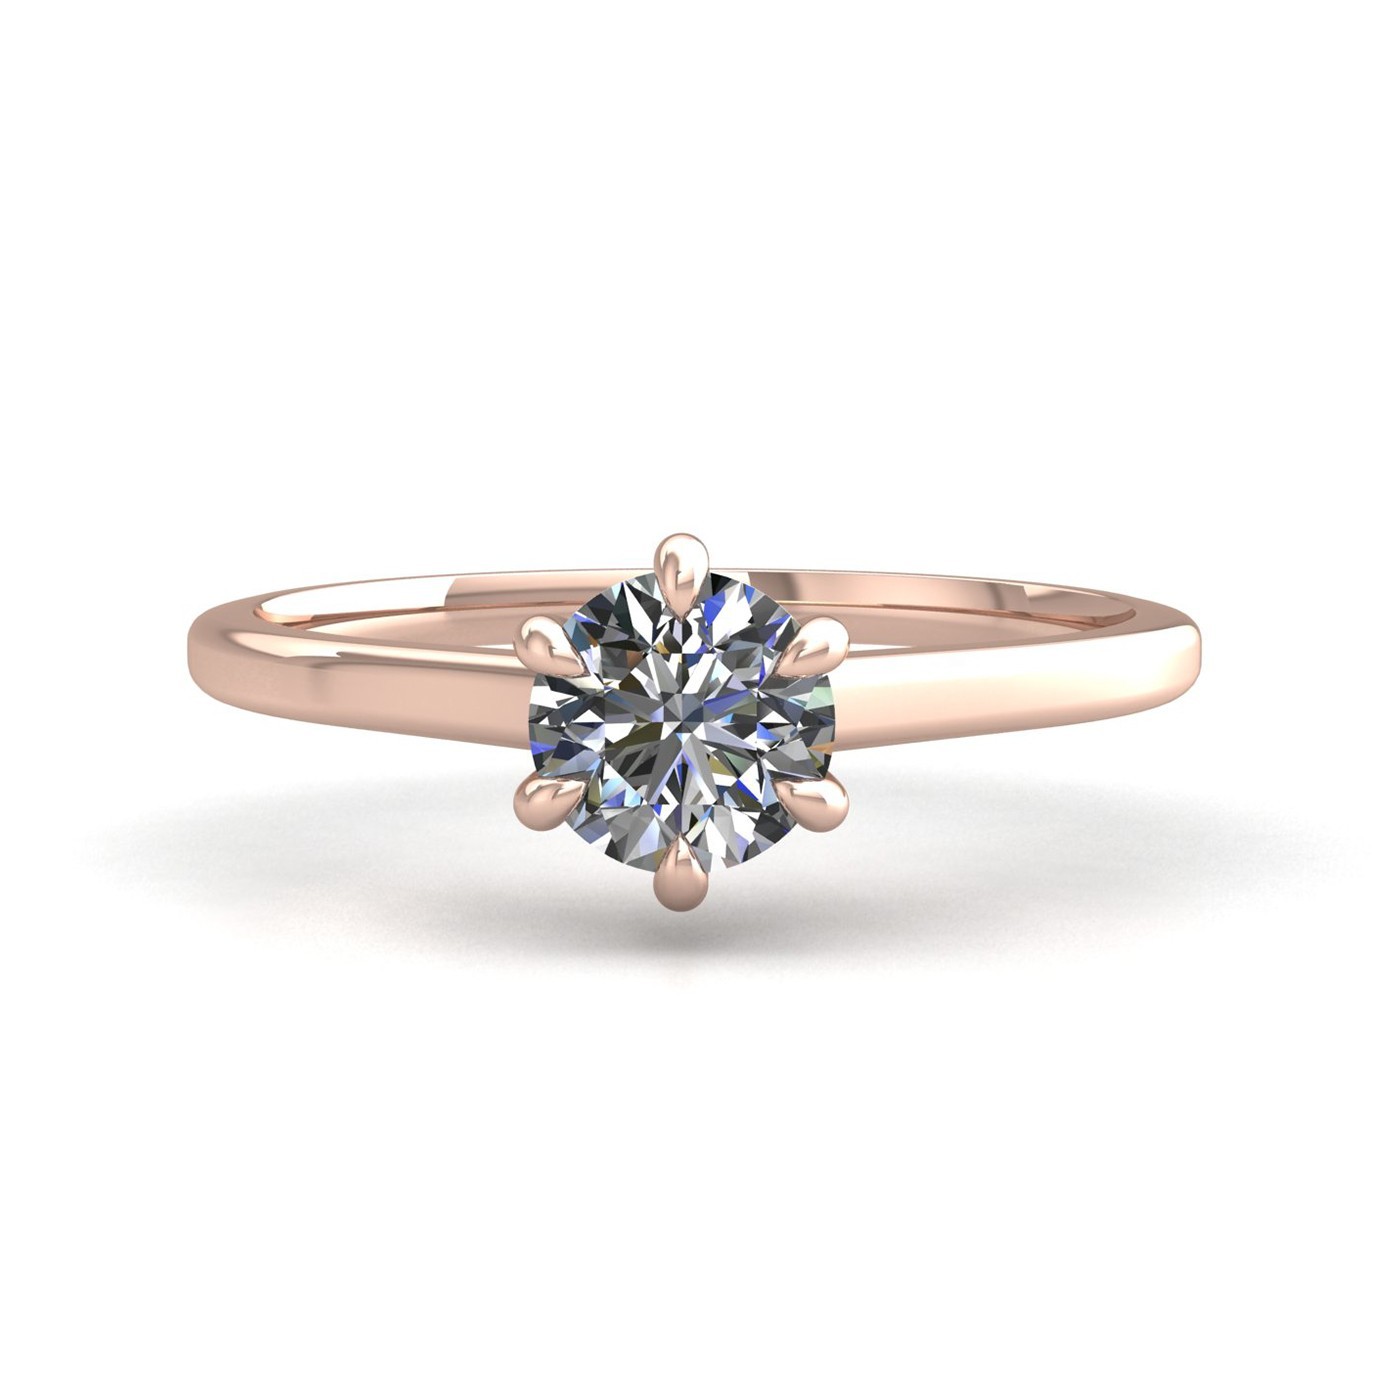 18k rose gold 0,50 ct 6 prongs solitaire round cut diamond engagement ring with whisper thin band Photos & images